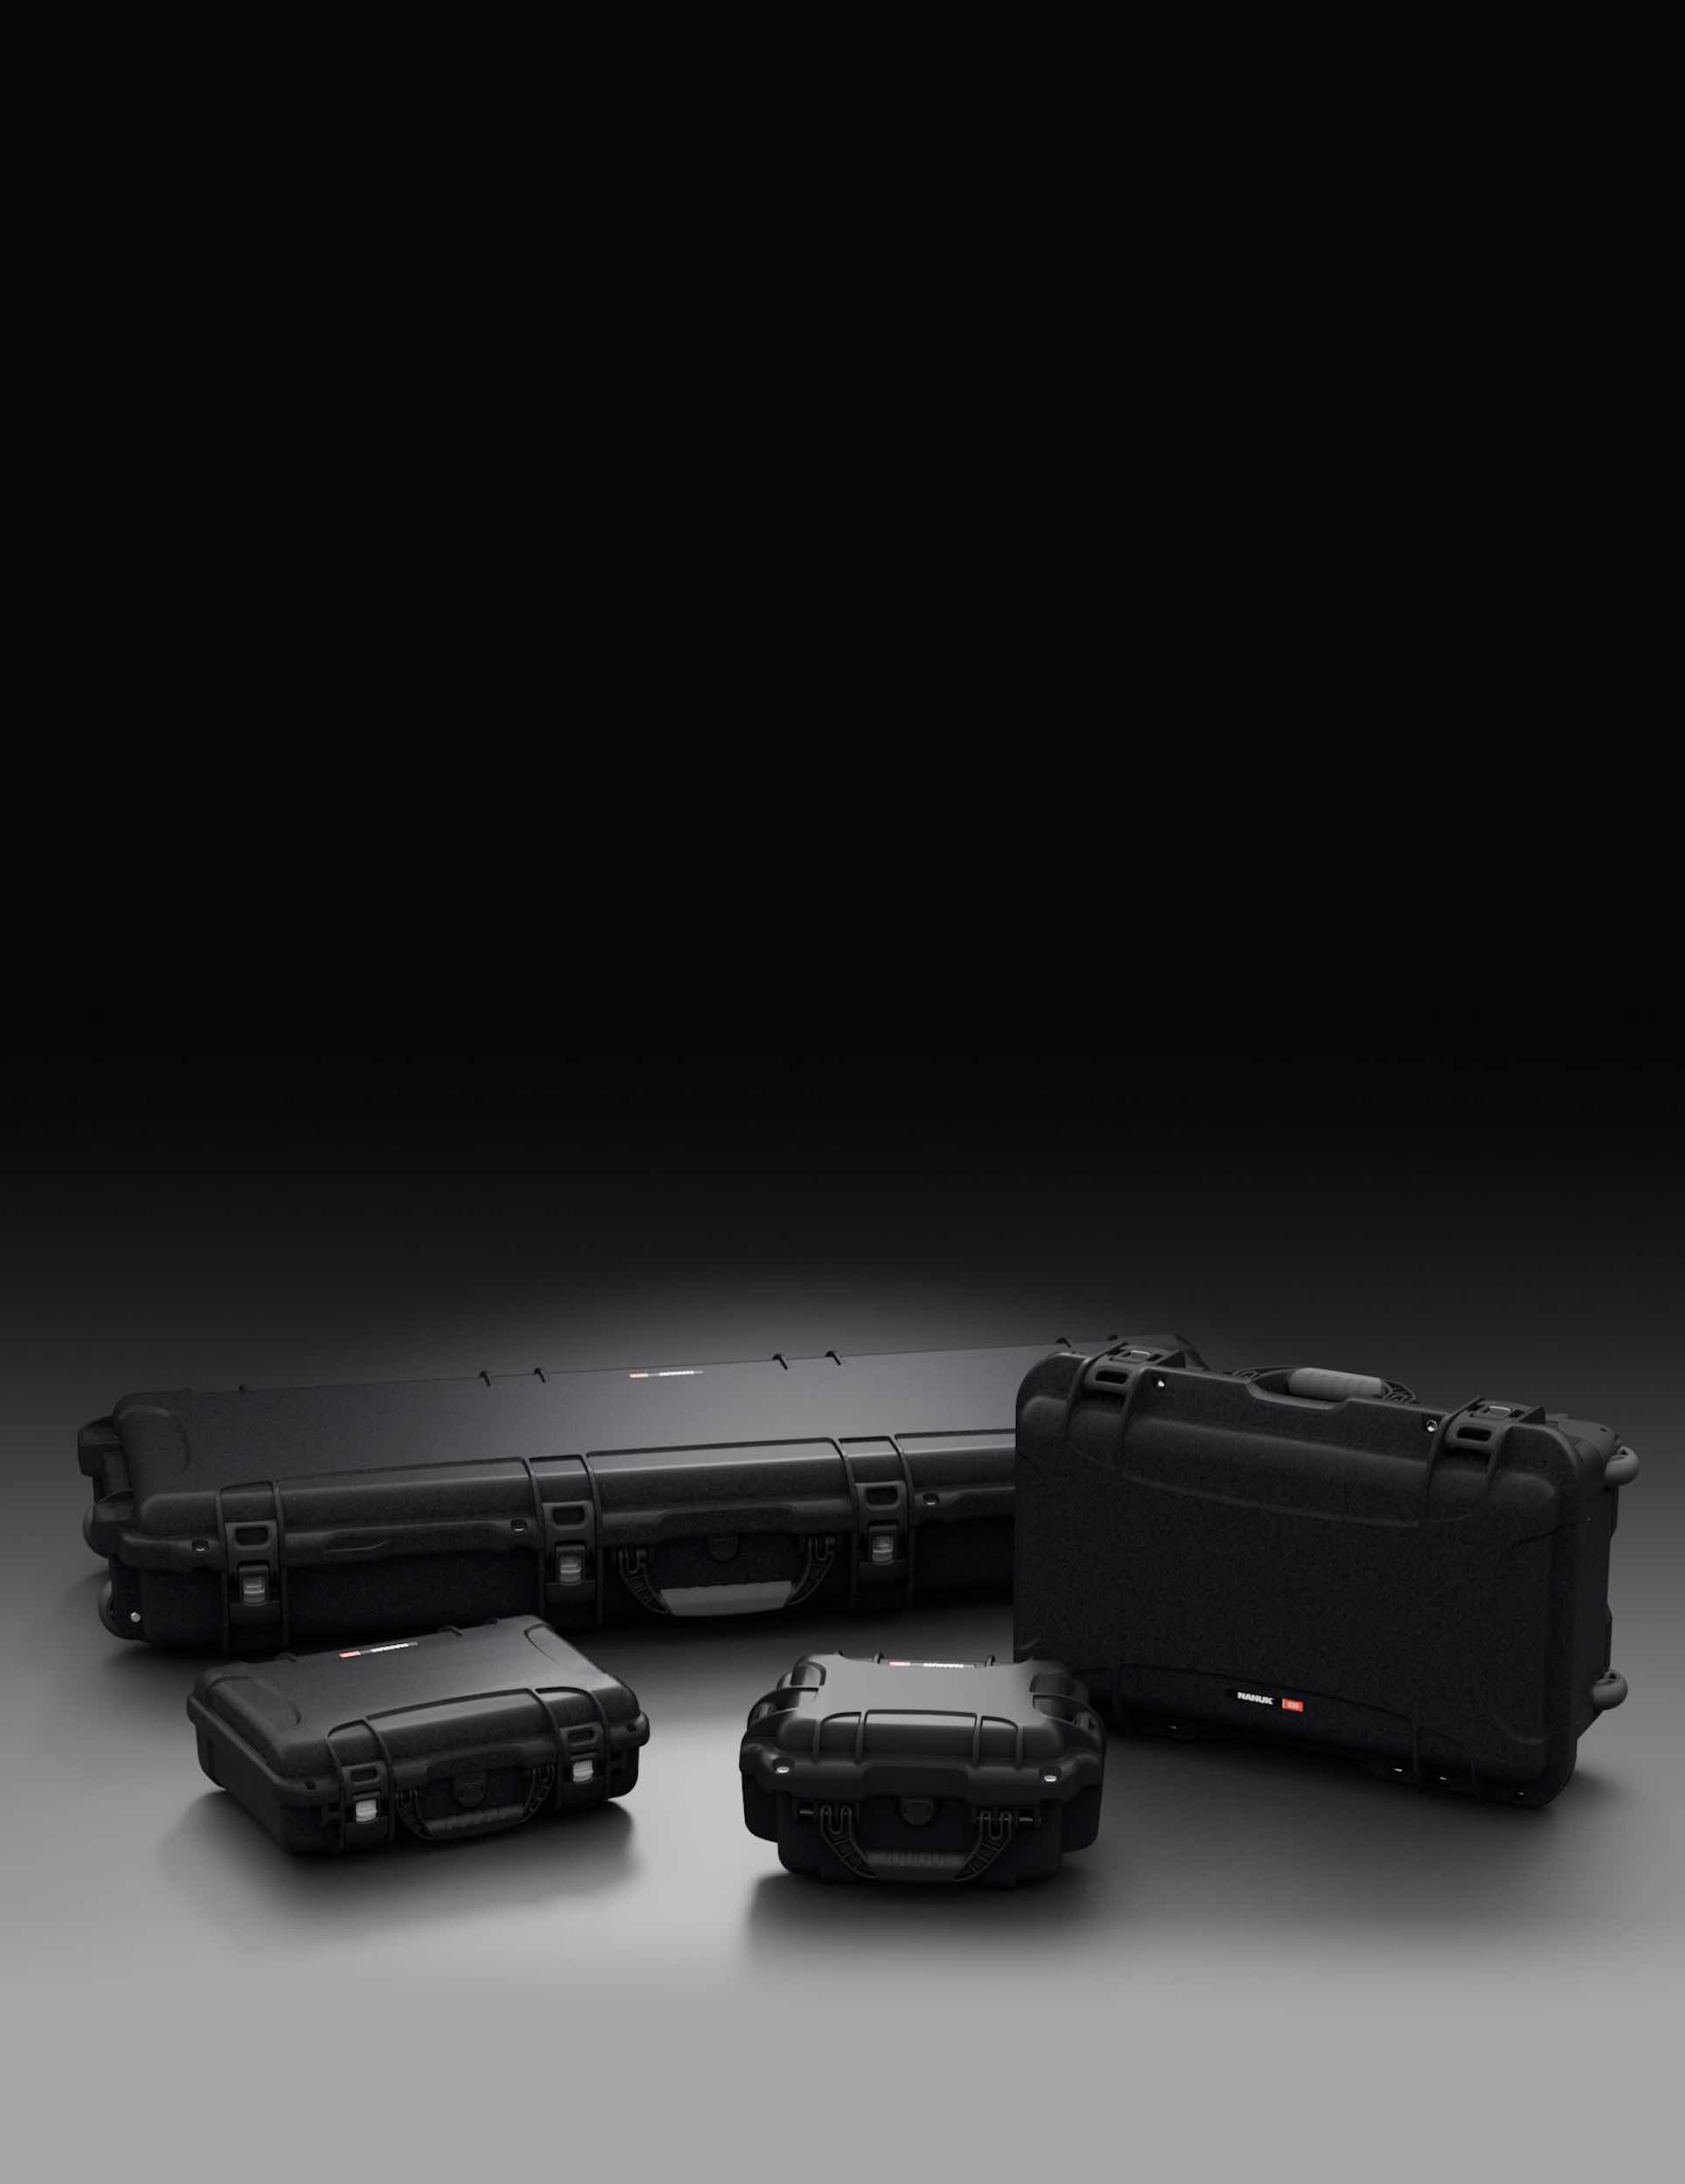 Collection of black NANUK hard cases of different sizes, highlighting durable and protective gear storage